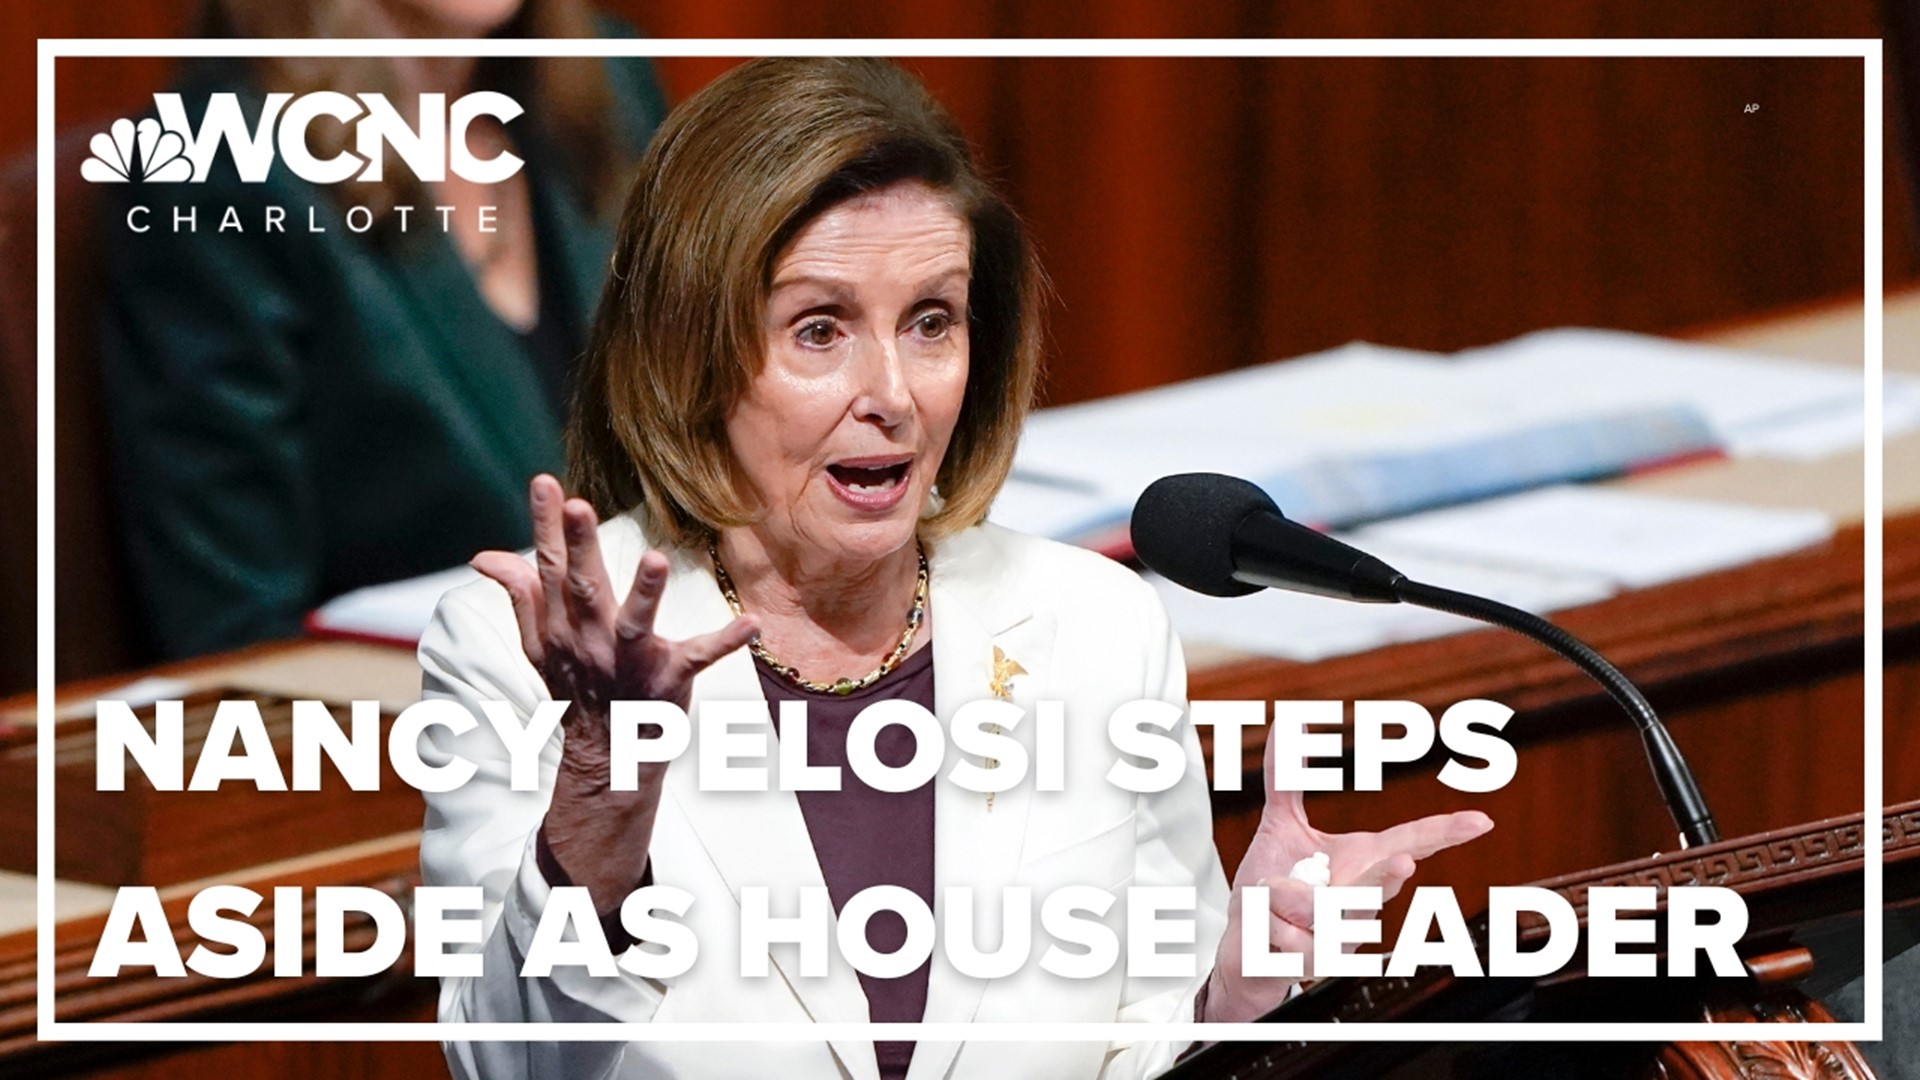 House Speaker Nancy Pelosi says she will not run for leadership role in new Congress.